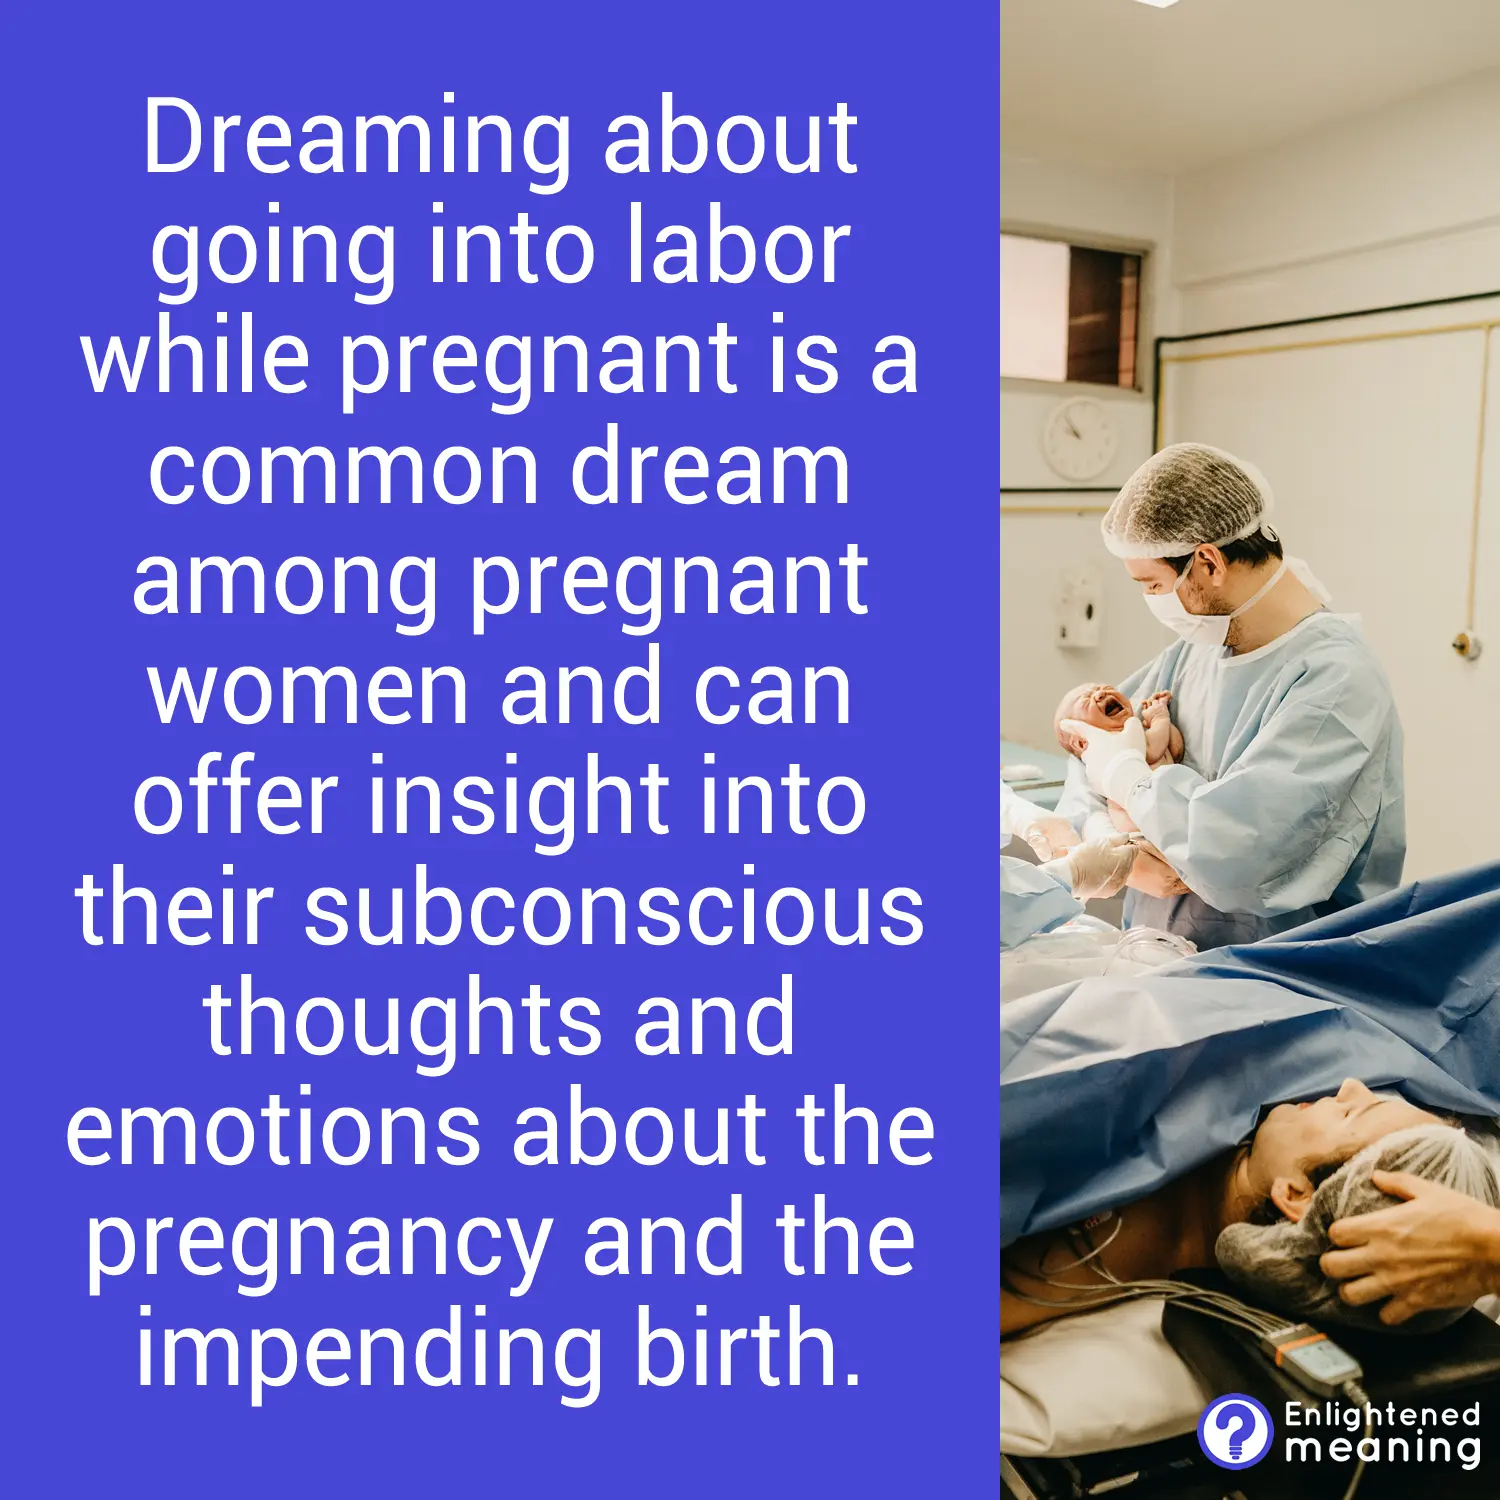 What is the meaning of dreams about going into labor while pregnant